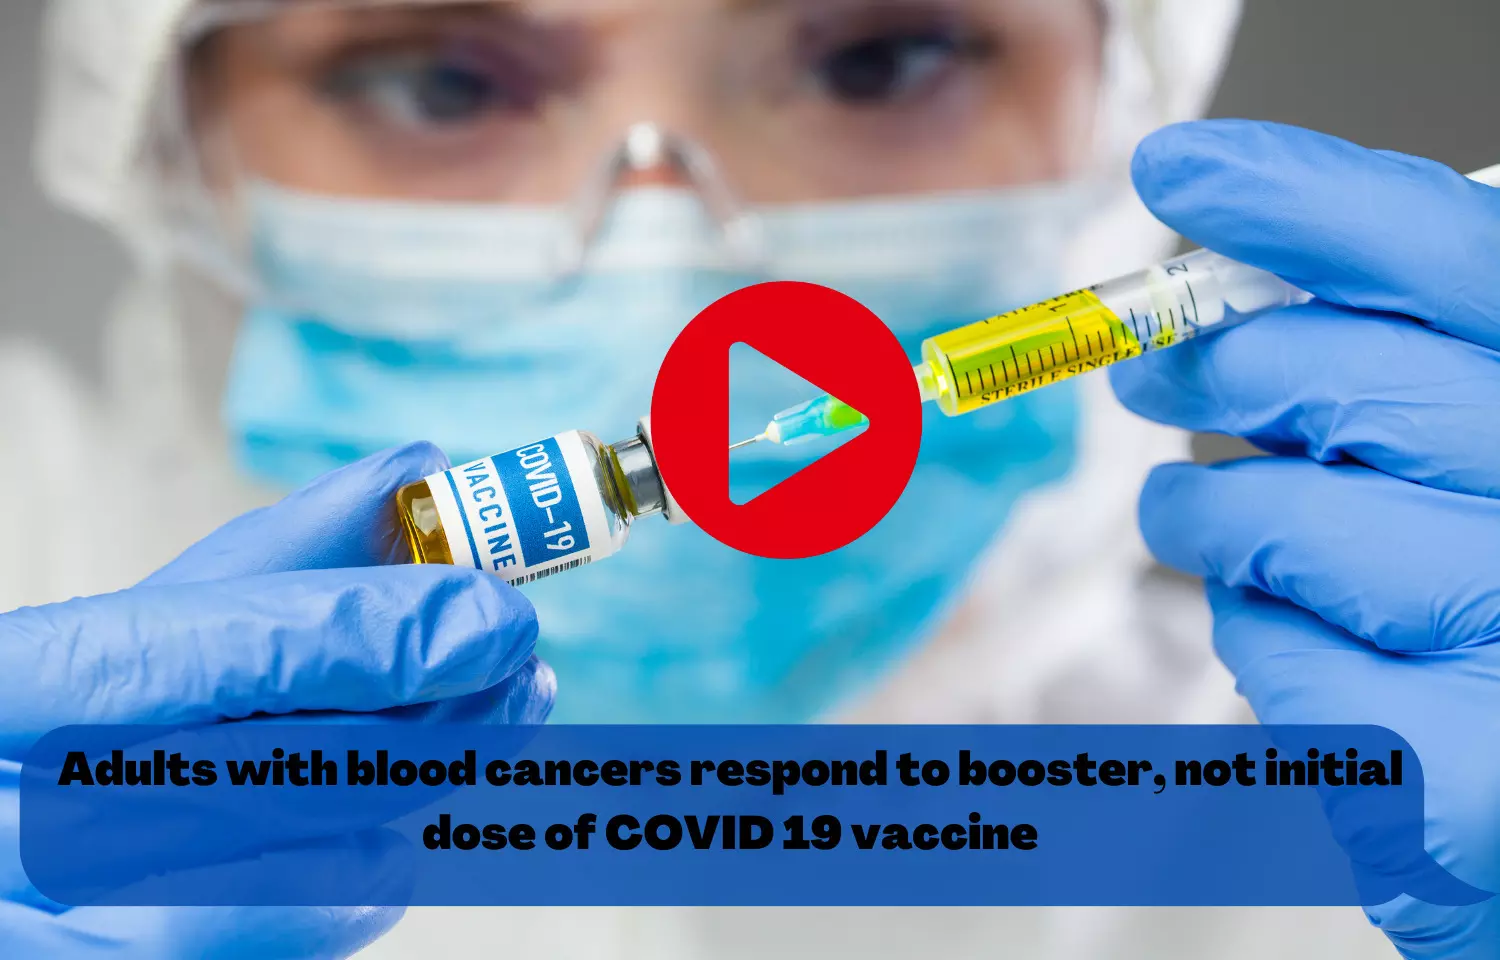 Adults with blood cancers respond to booster, not initial dose of COVID 19 vaccine